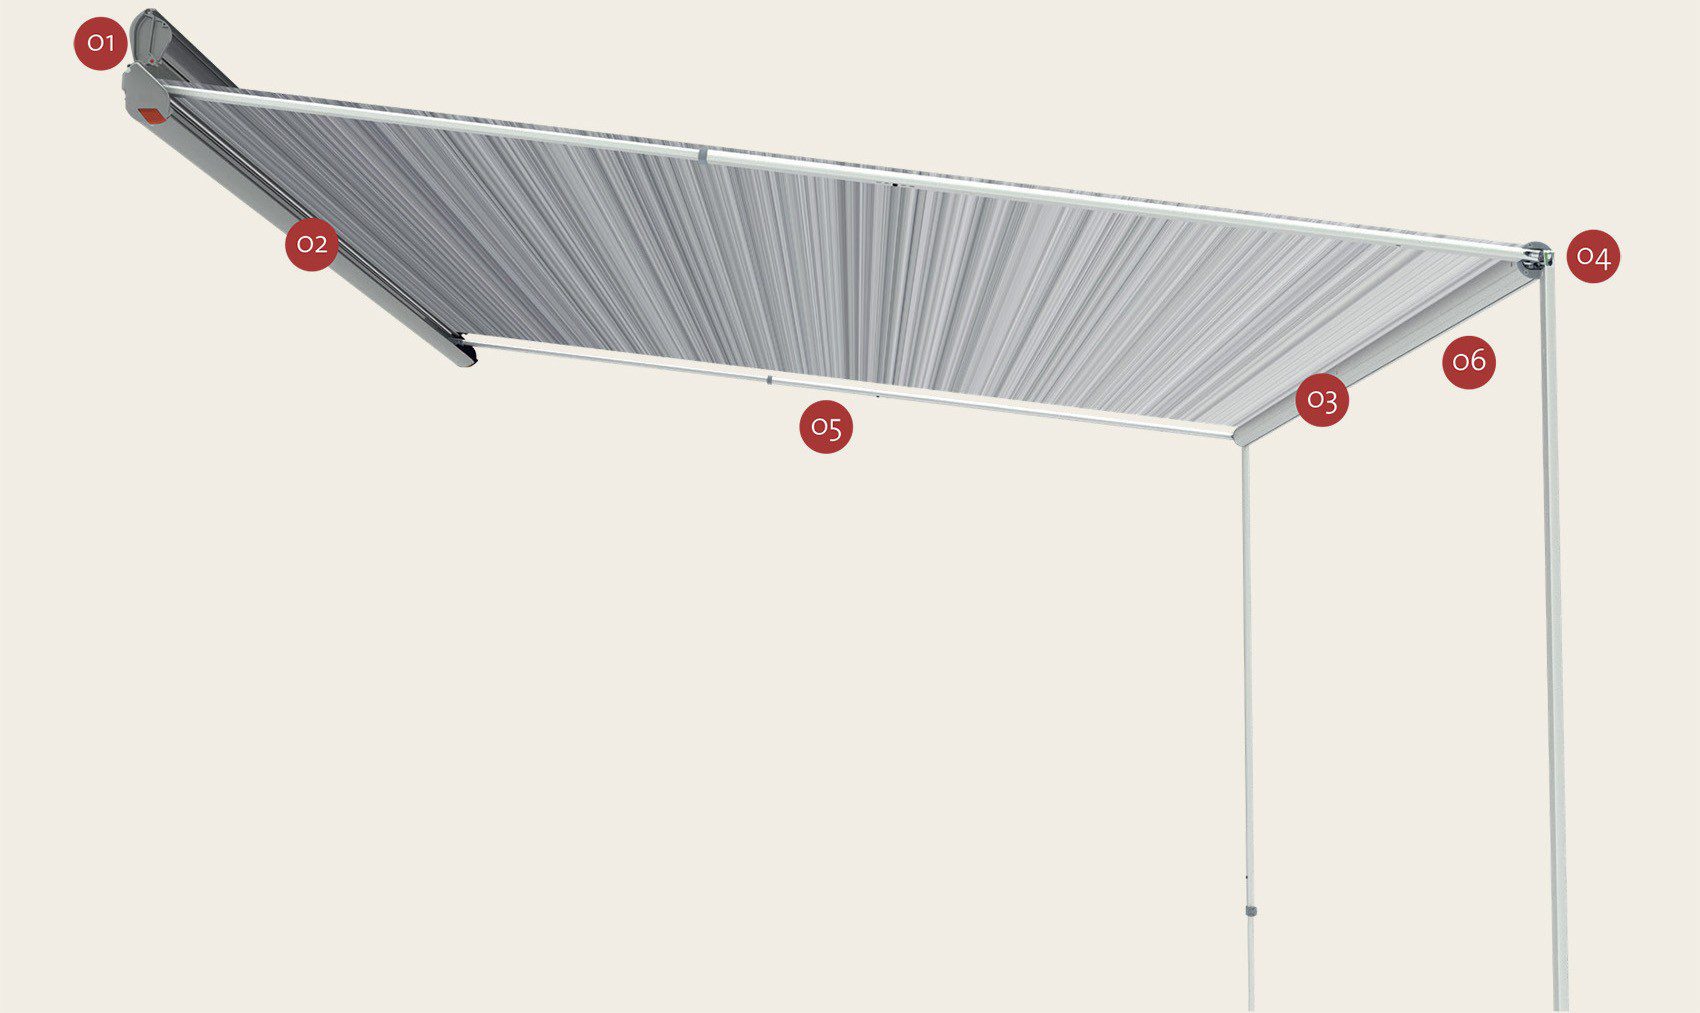 Fiamma-F35-Pro-Wall-Mount-Awning Features